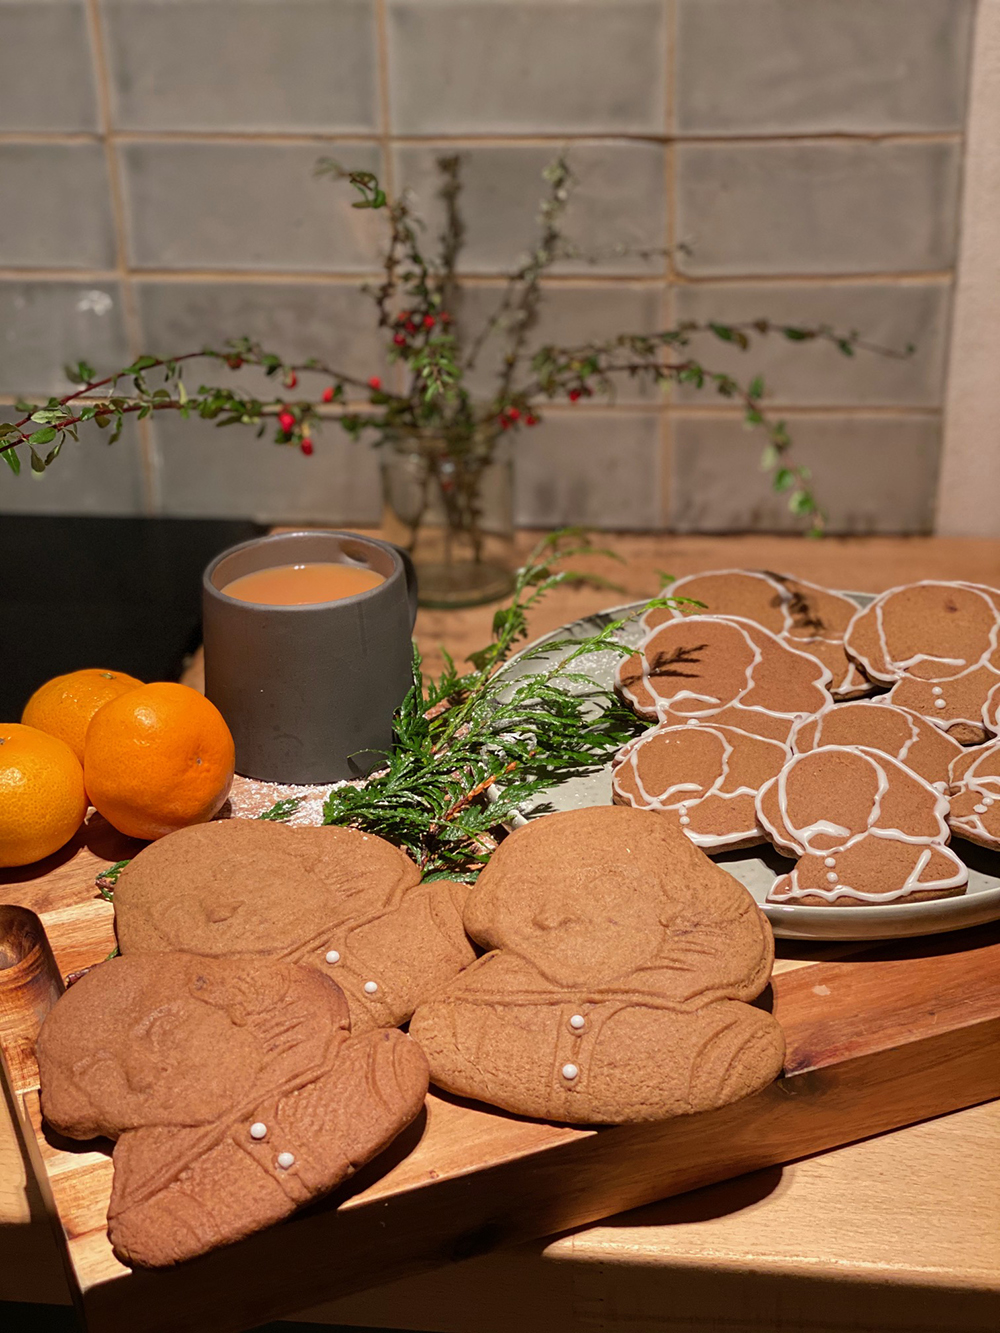 Gingerbread biscuits in the shape of Shakespeare's face rest on a plate with a mug of tea.